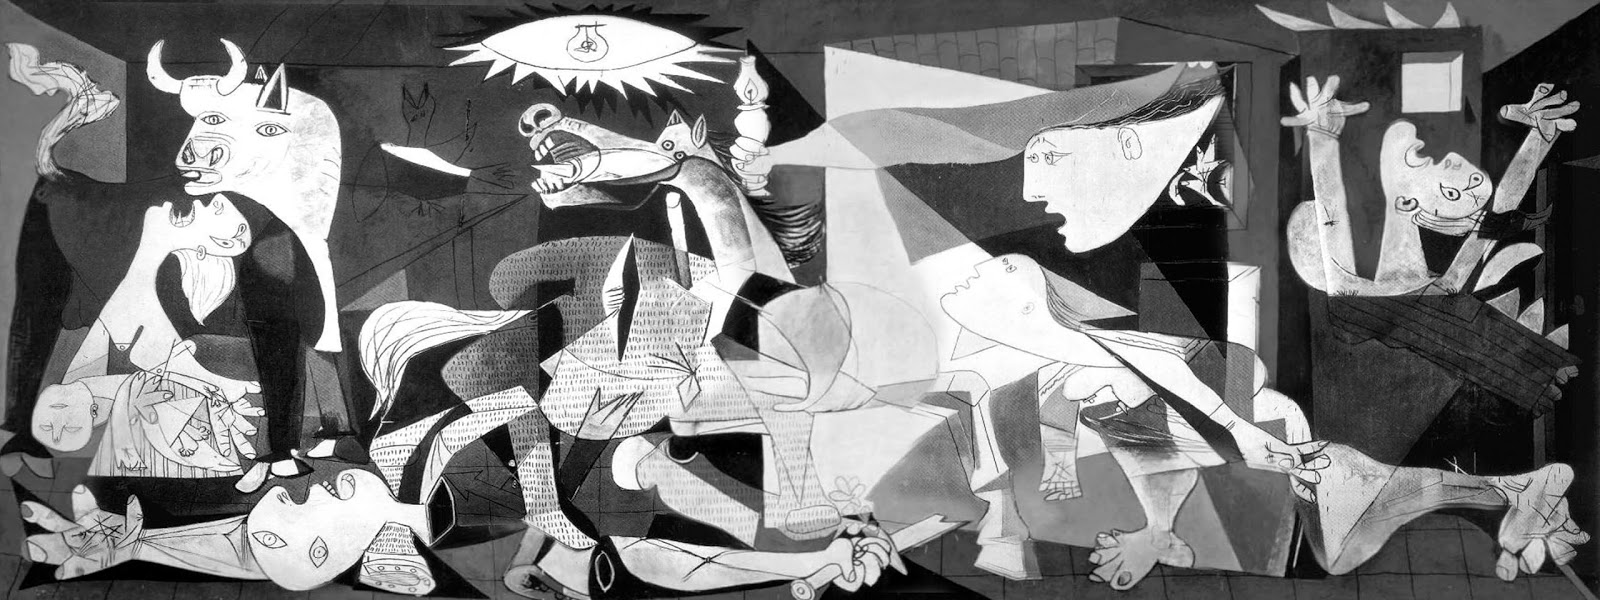 'Guernica' by Pablo Picasso